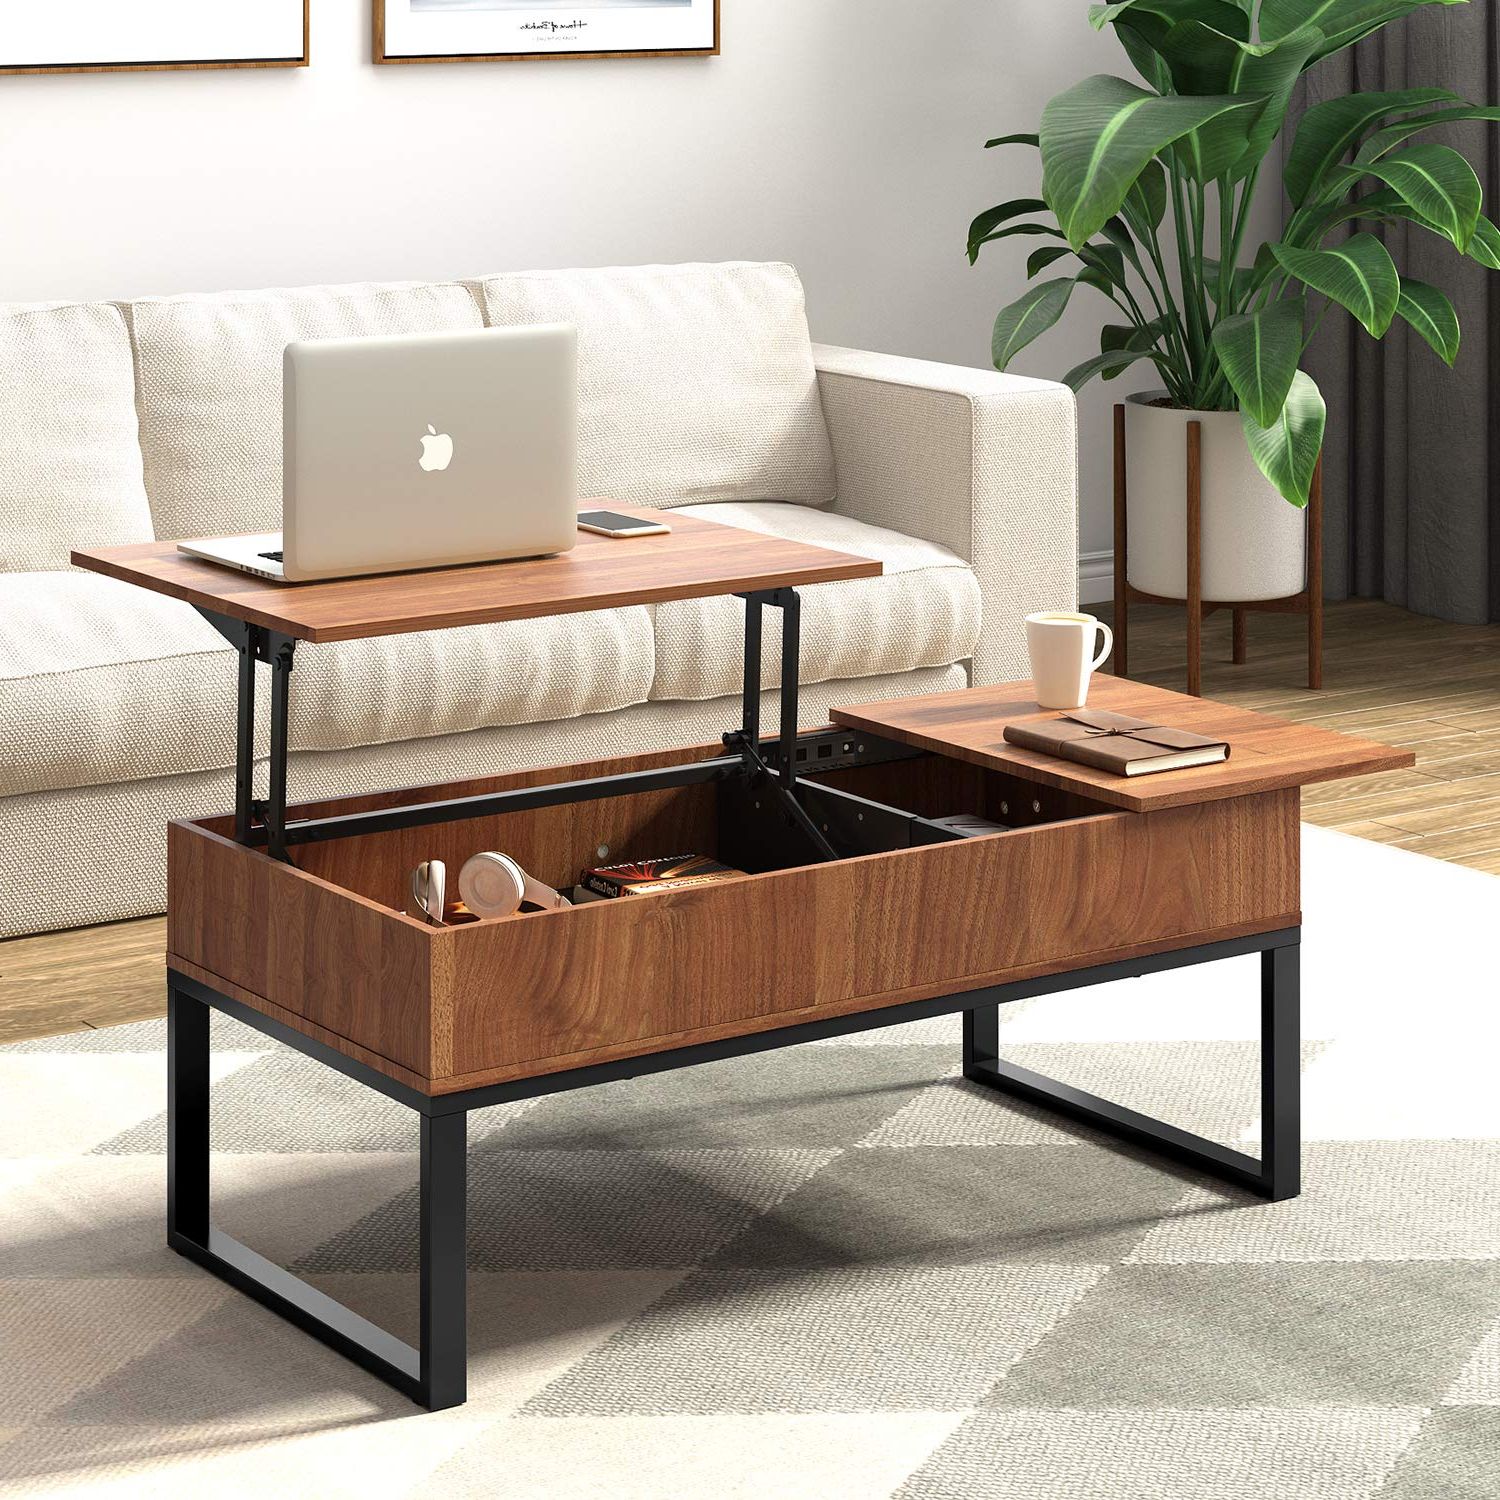 Wlive Wood Coffee Table With Adjustable Lift Top Table, Metal Frame With 2019 Modern Coffee Tables With Hidden Storage Compartments (View 6 of 15)